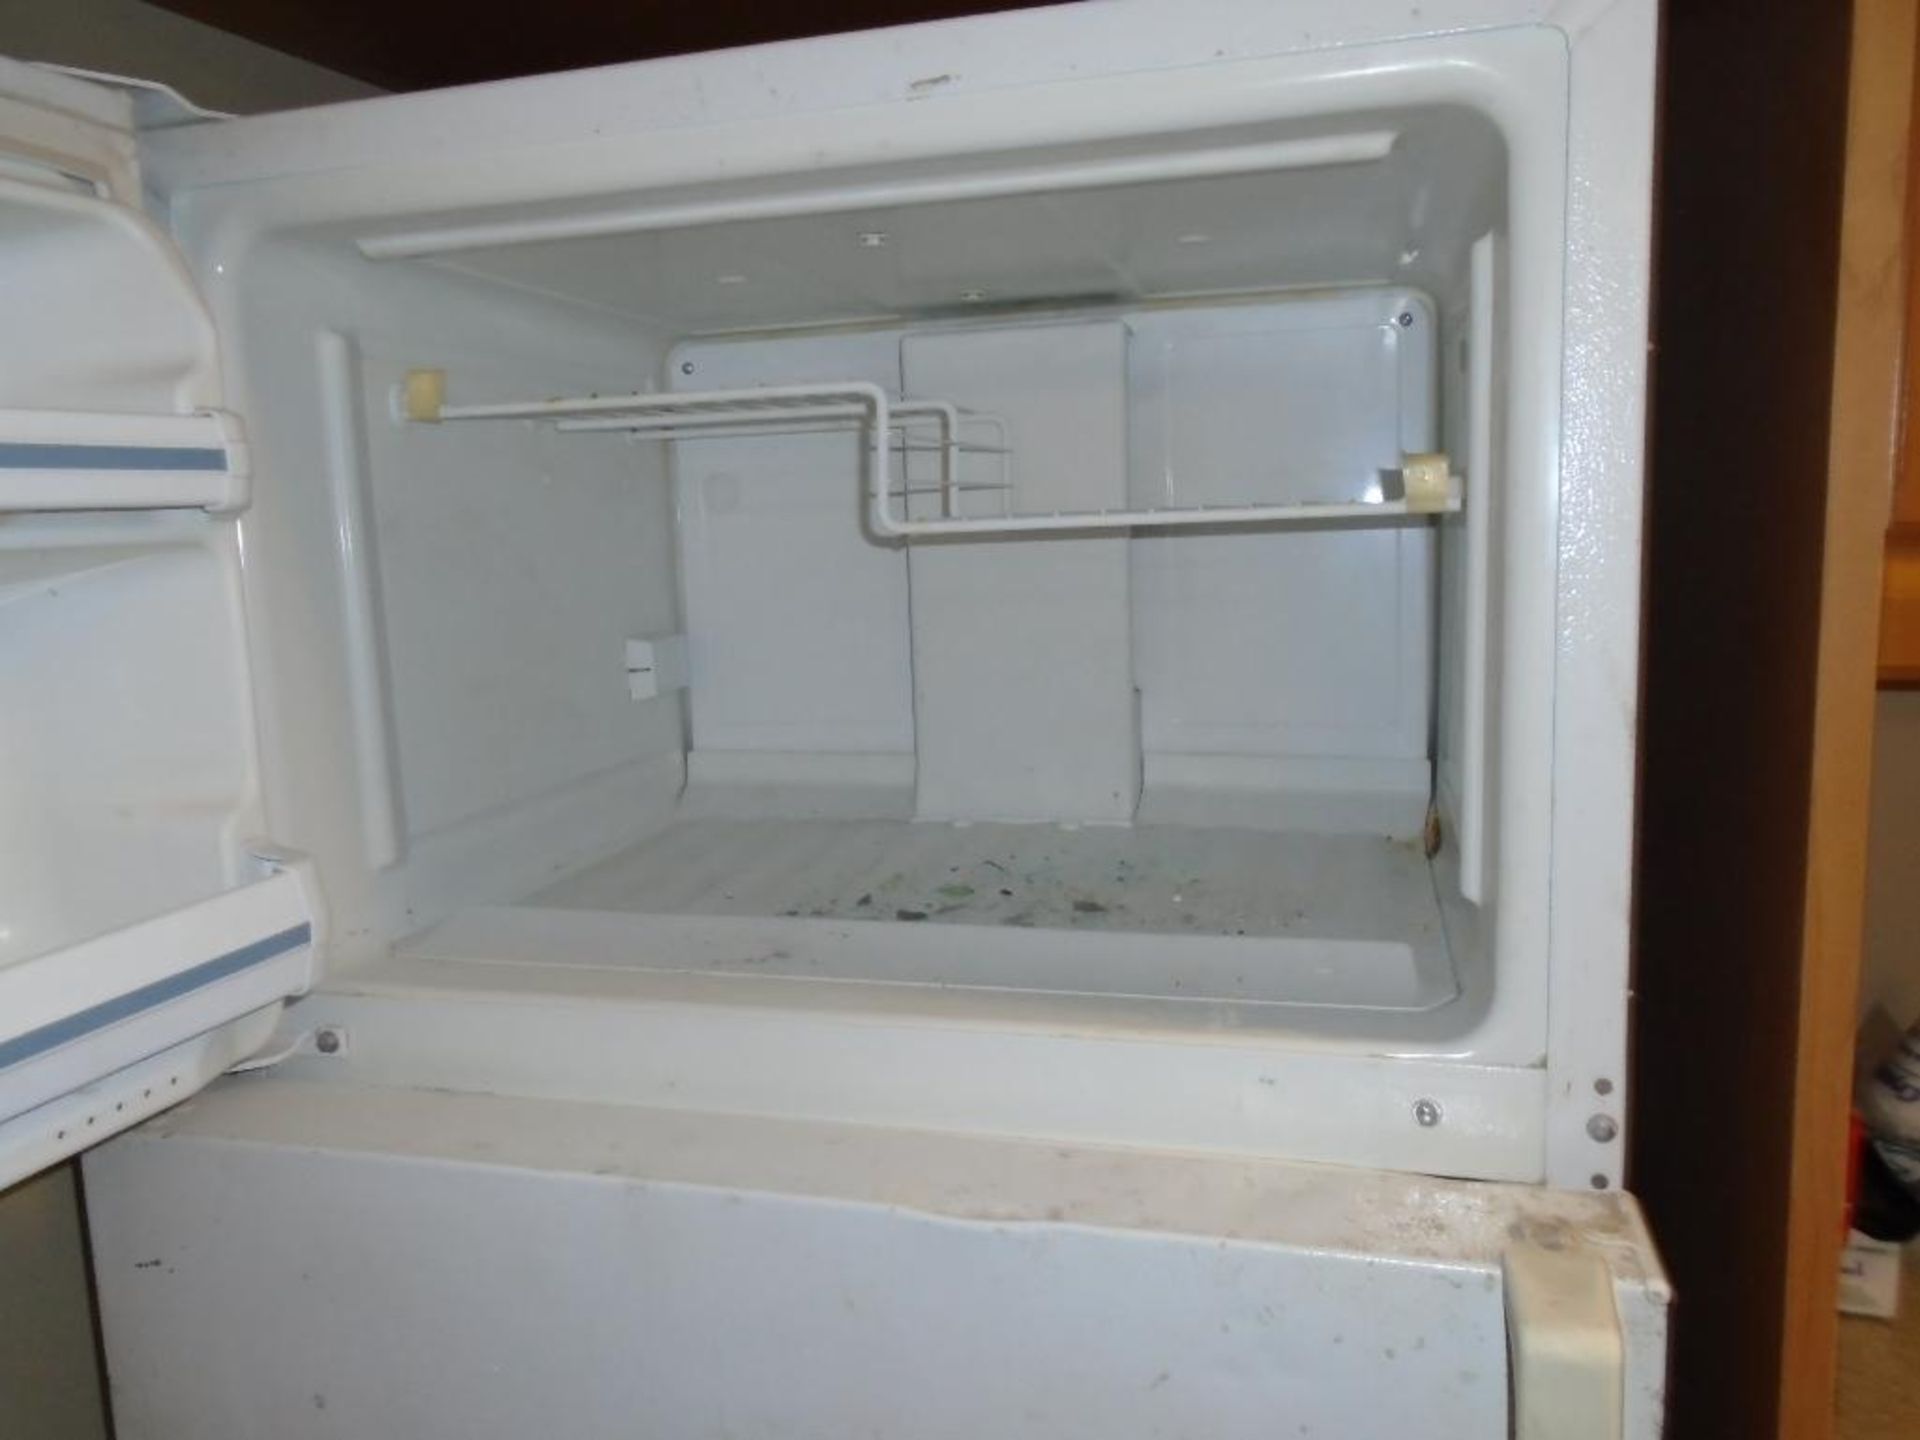 Kitchen appliances consisting of ge refrigerator, ge microwave and toaster - Image 2 of 6